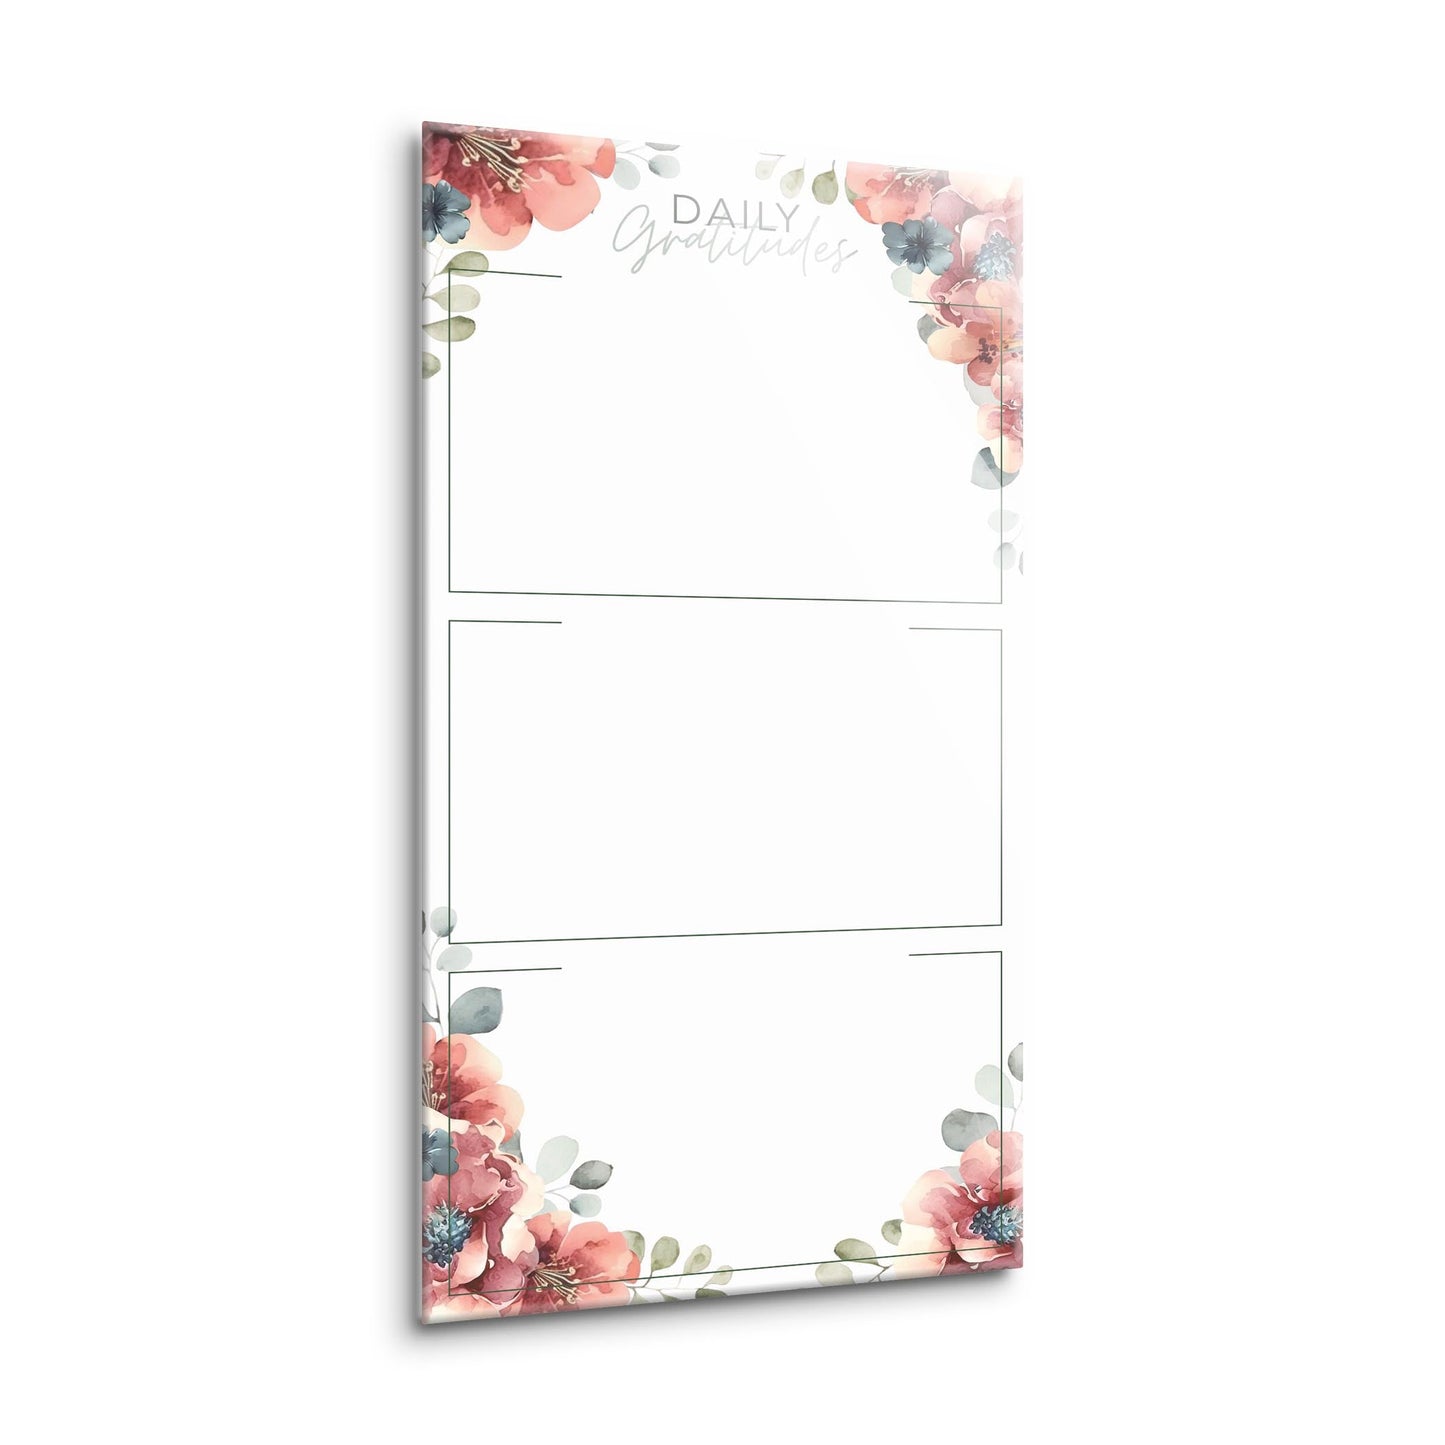 Floral Daily Gratitudes Message Board | 8x16